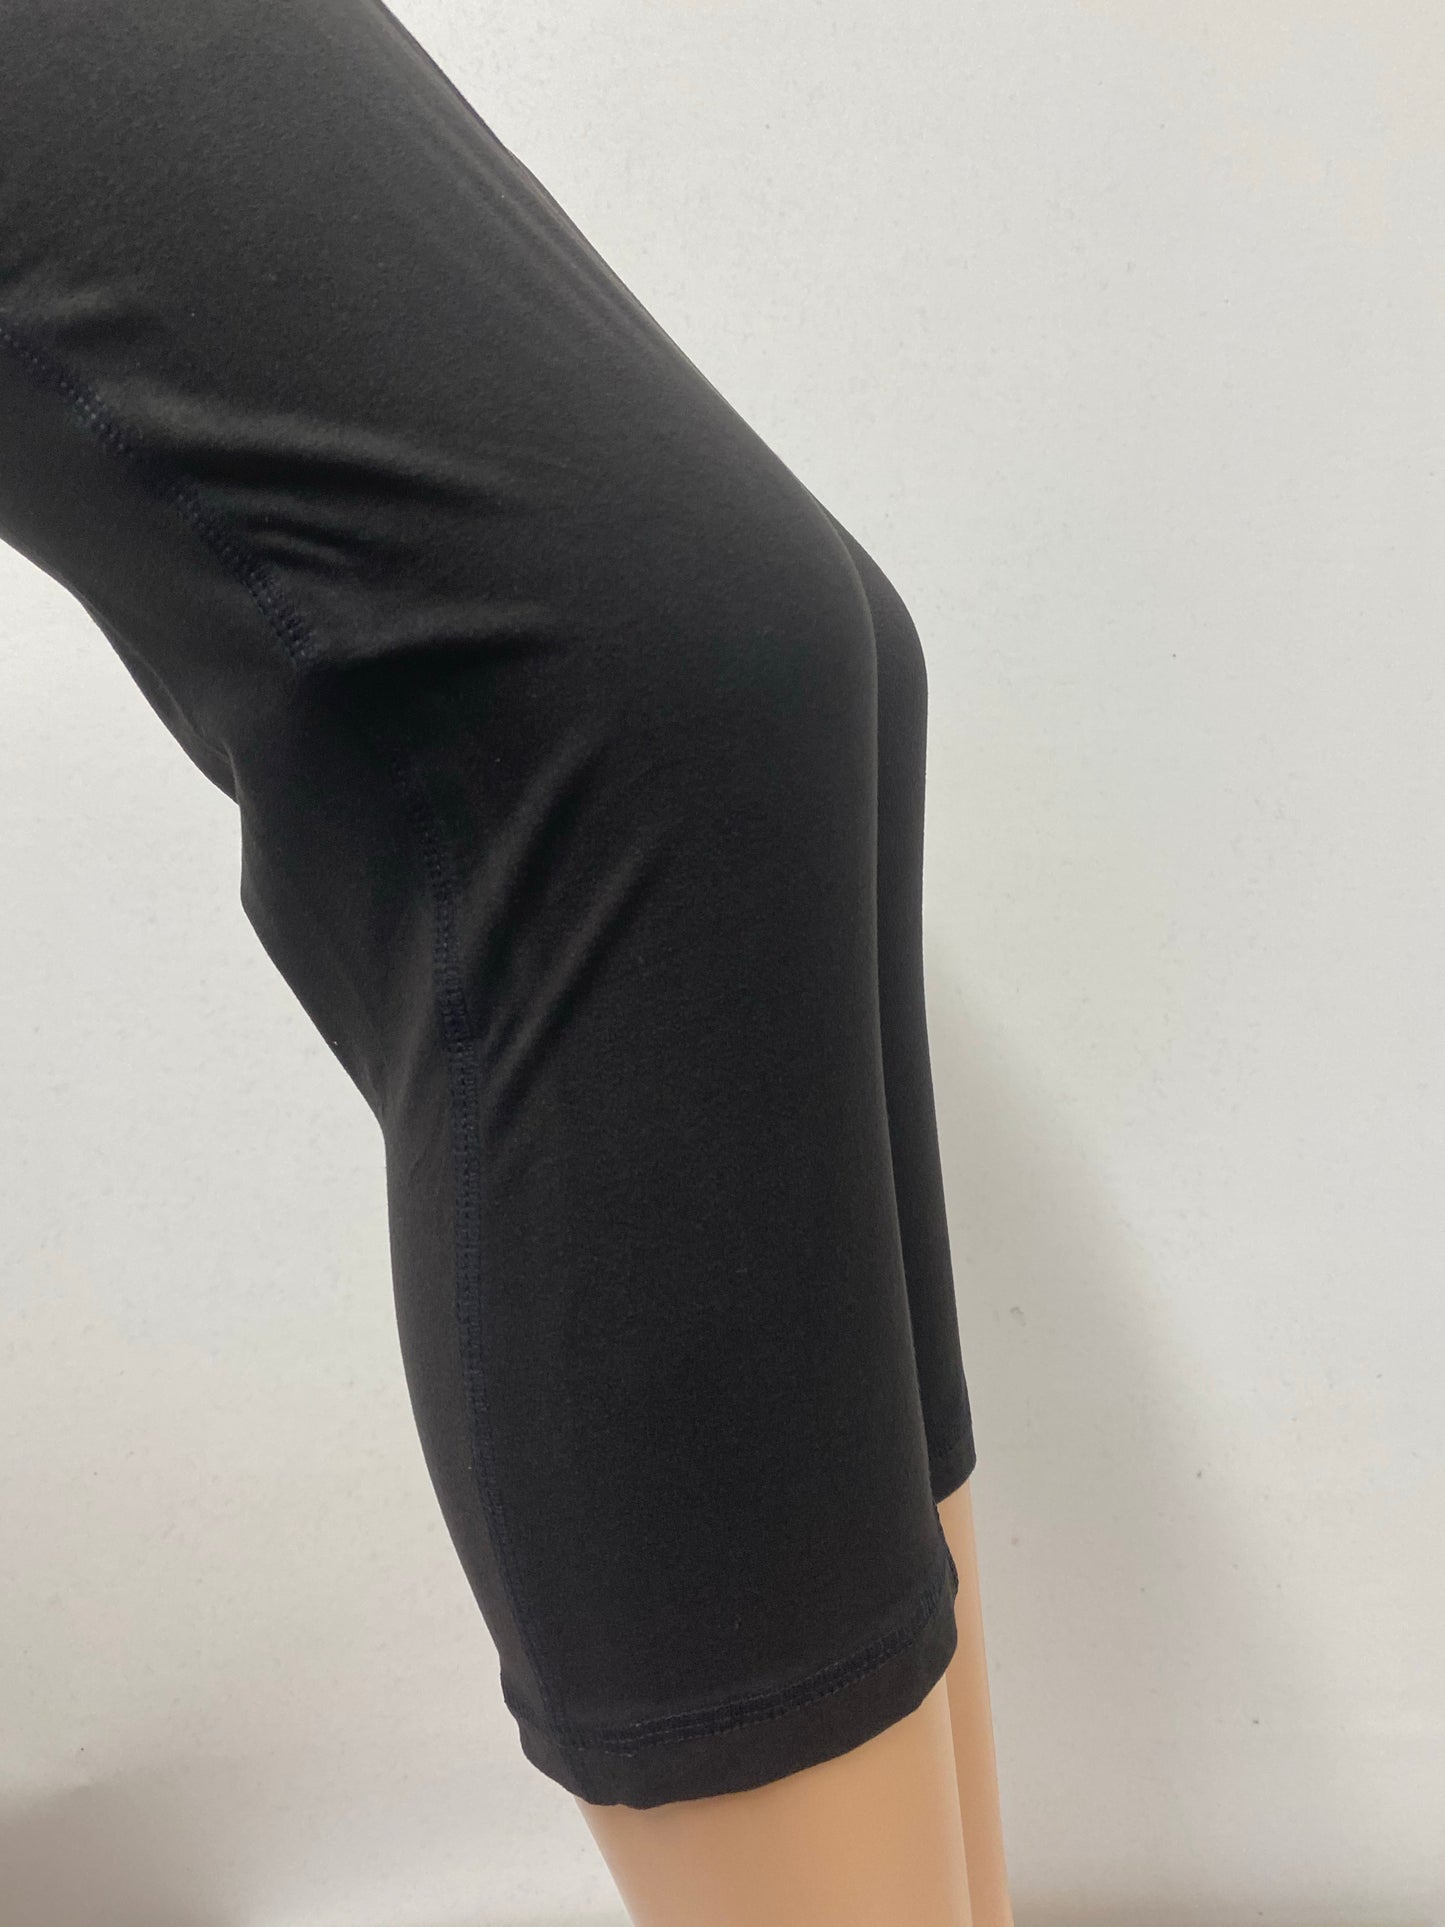 Extra Plus Black Capri's with Yoga Band and Pockets